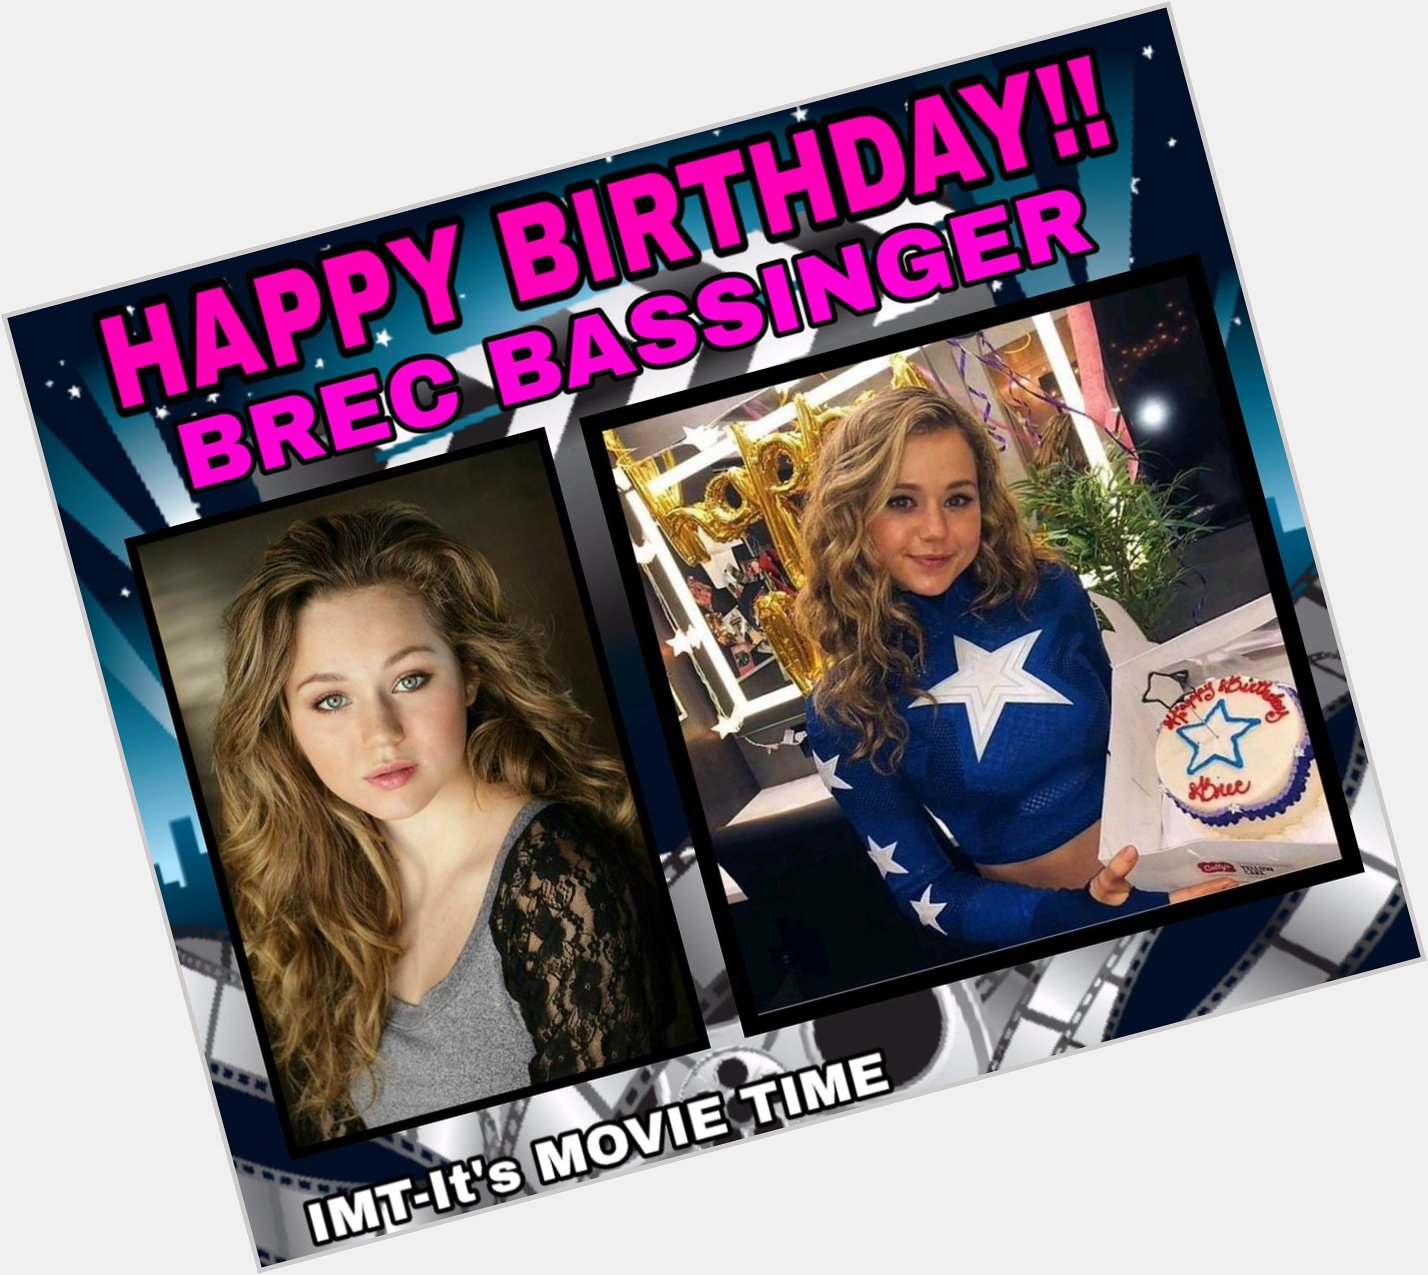 Happy Birthday to the Beautiful Brec Bassinger! The actress is celebrating 21 years. 